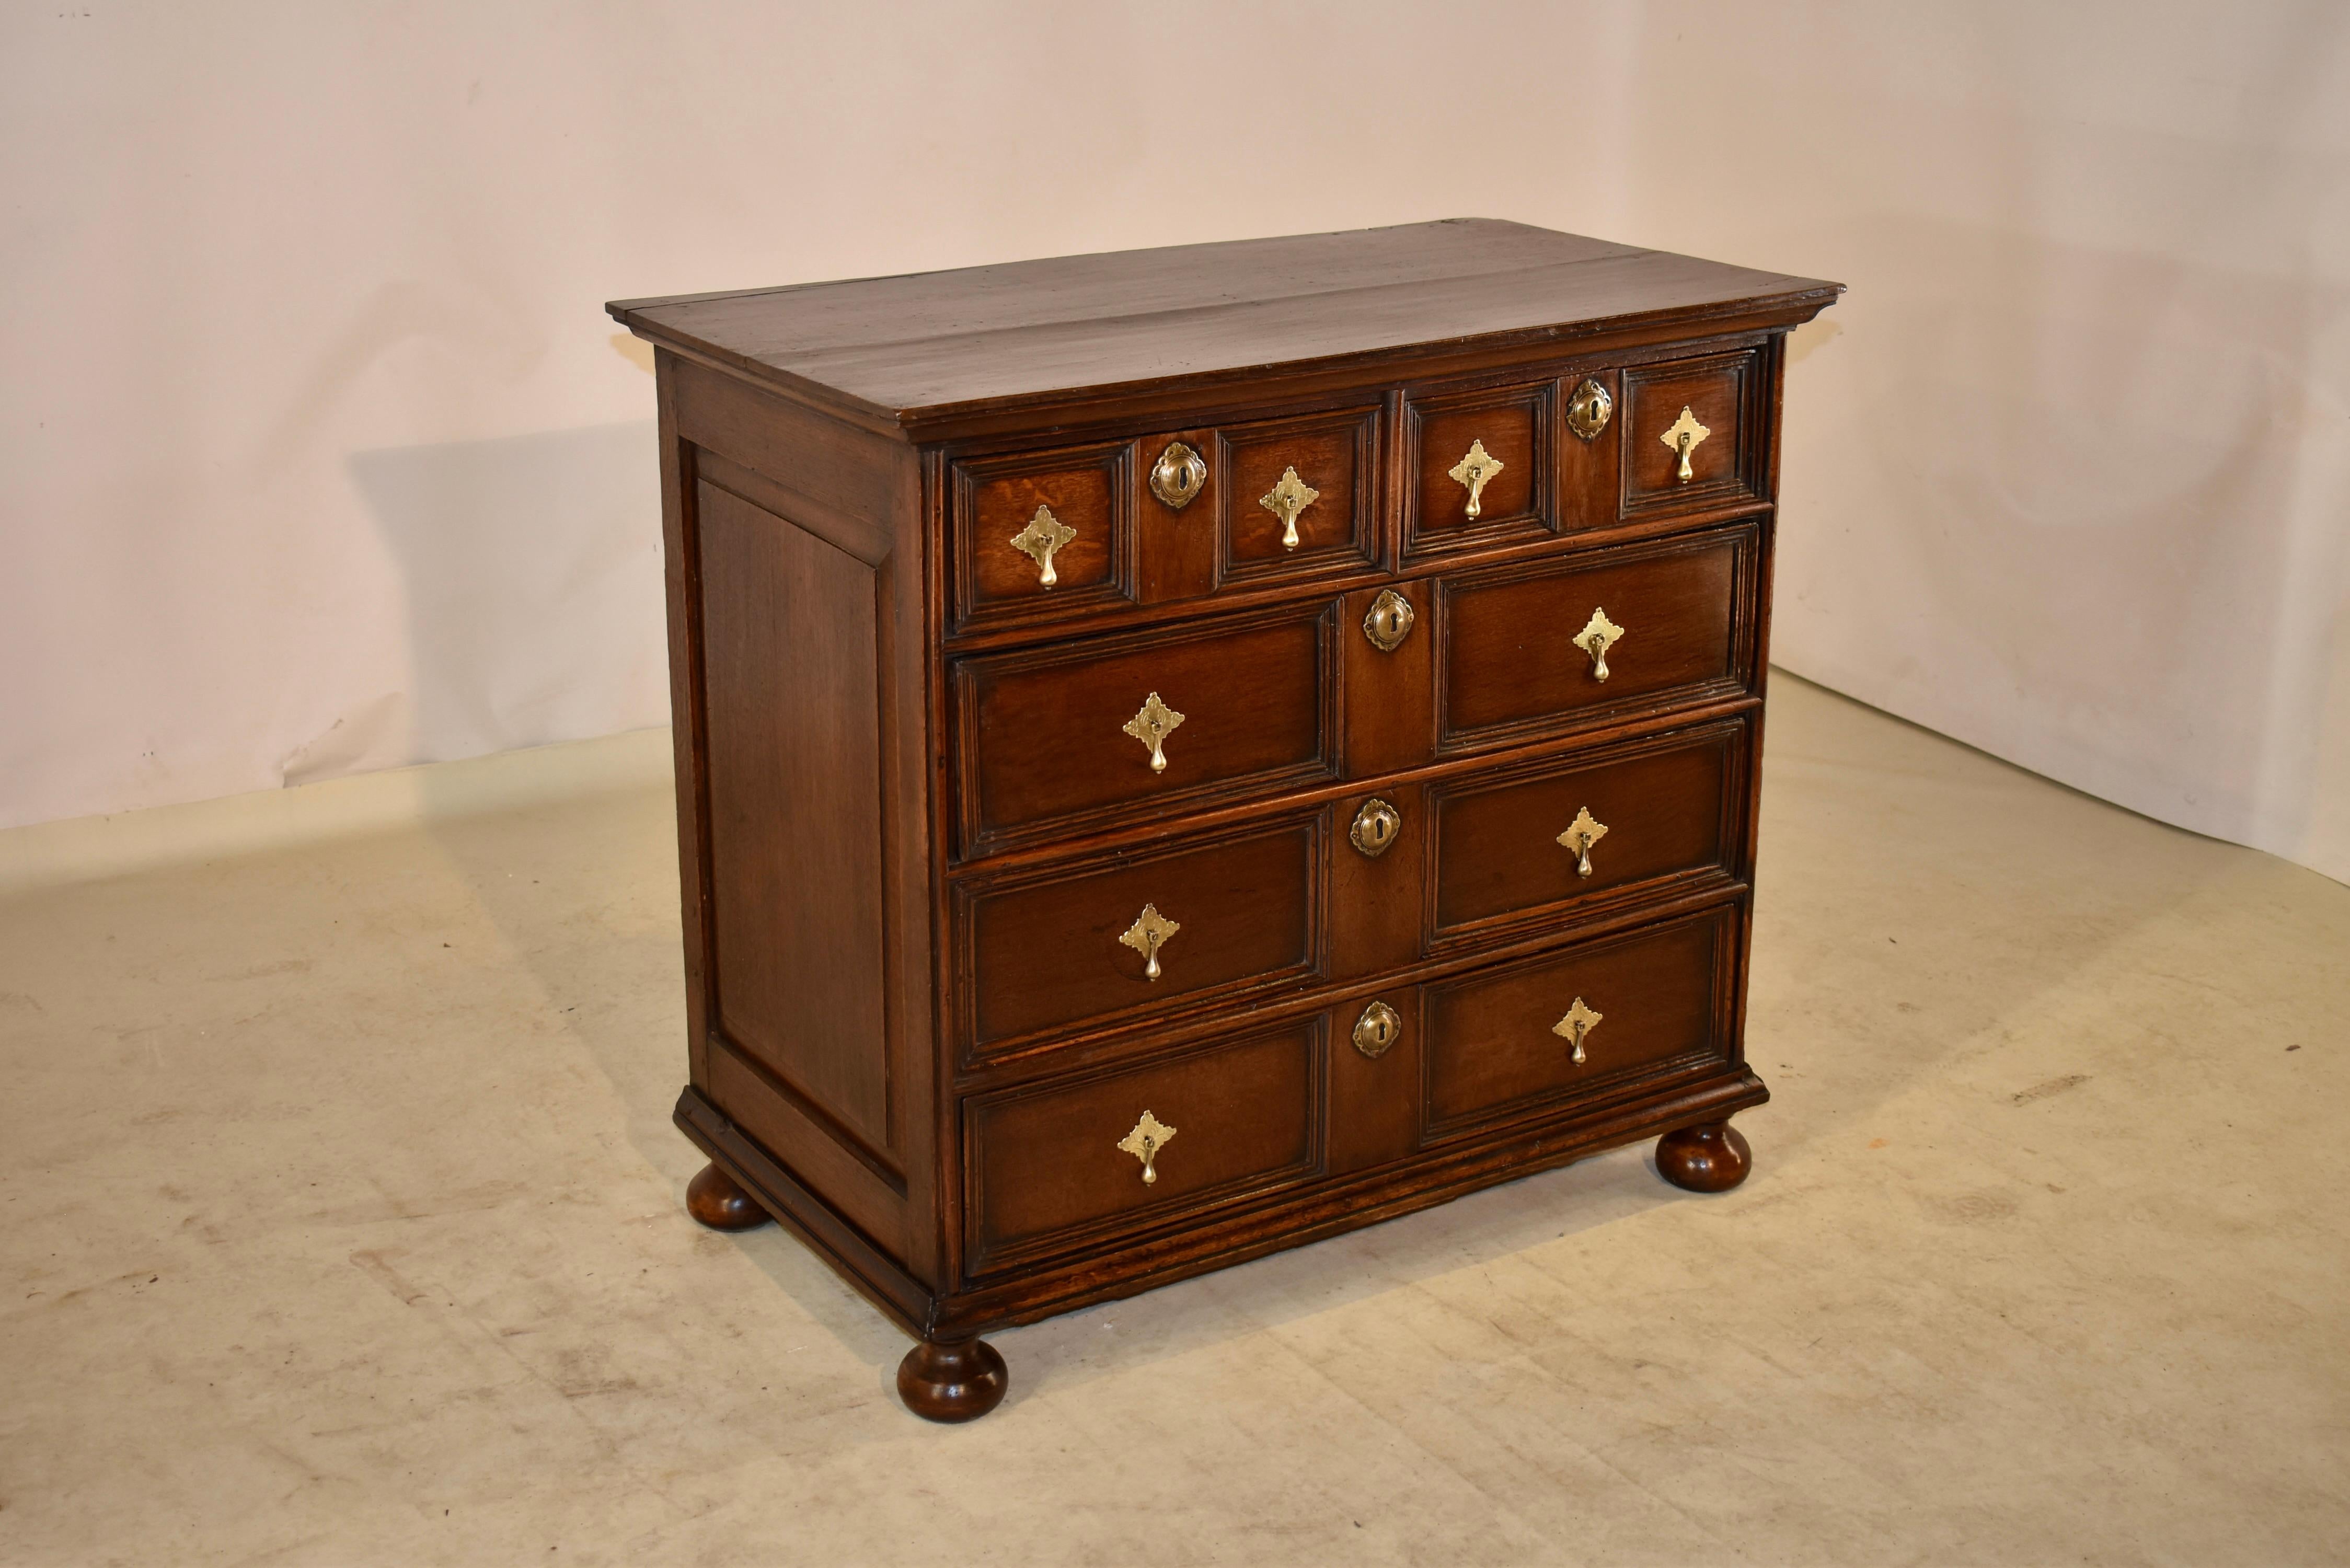 Jacobean Early 18th Century Paneled Chest of Drawers For Sale